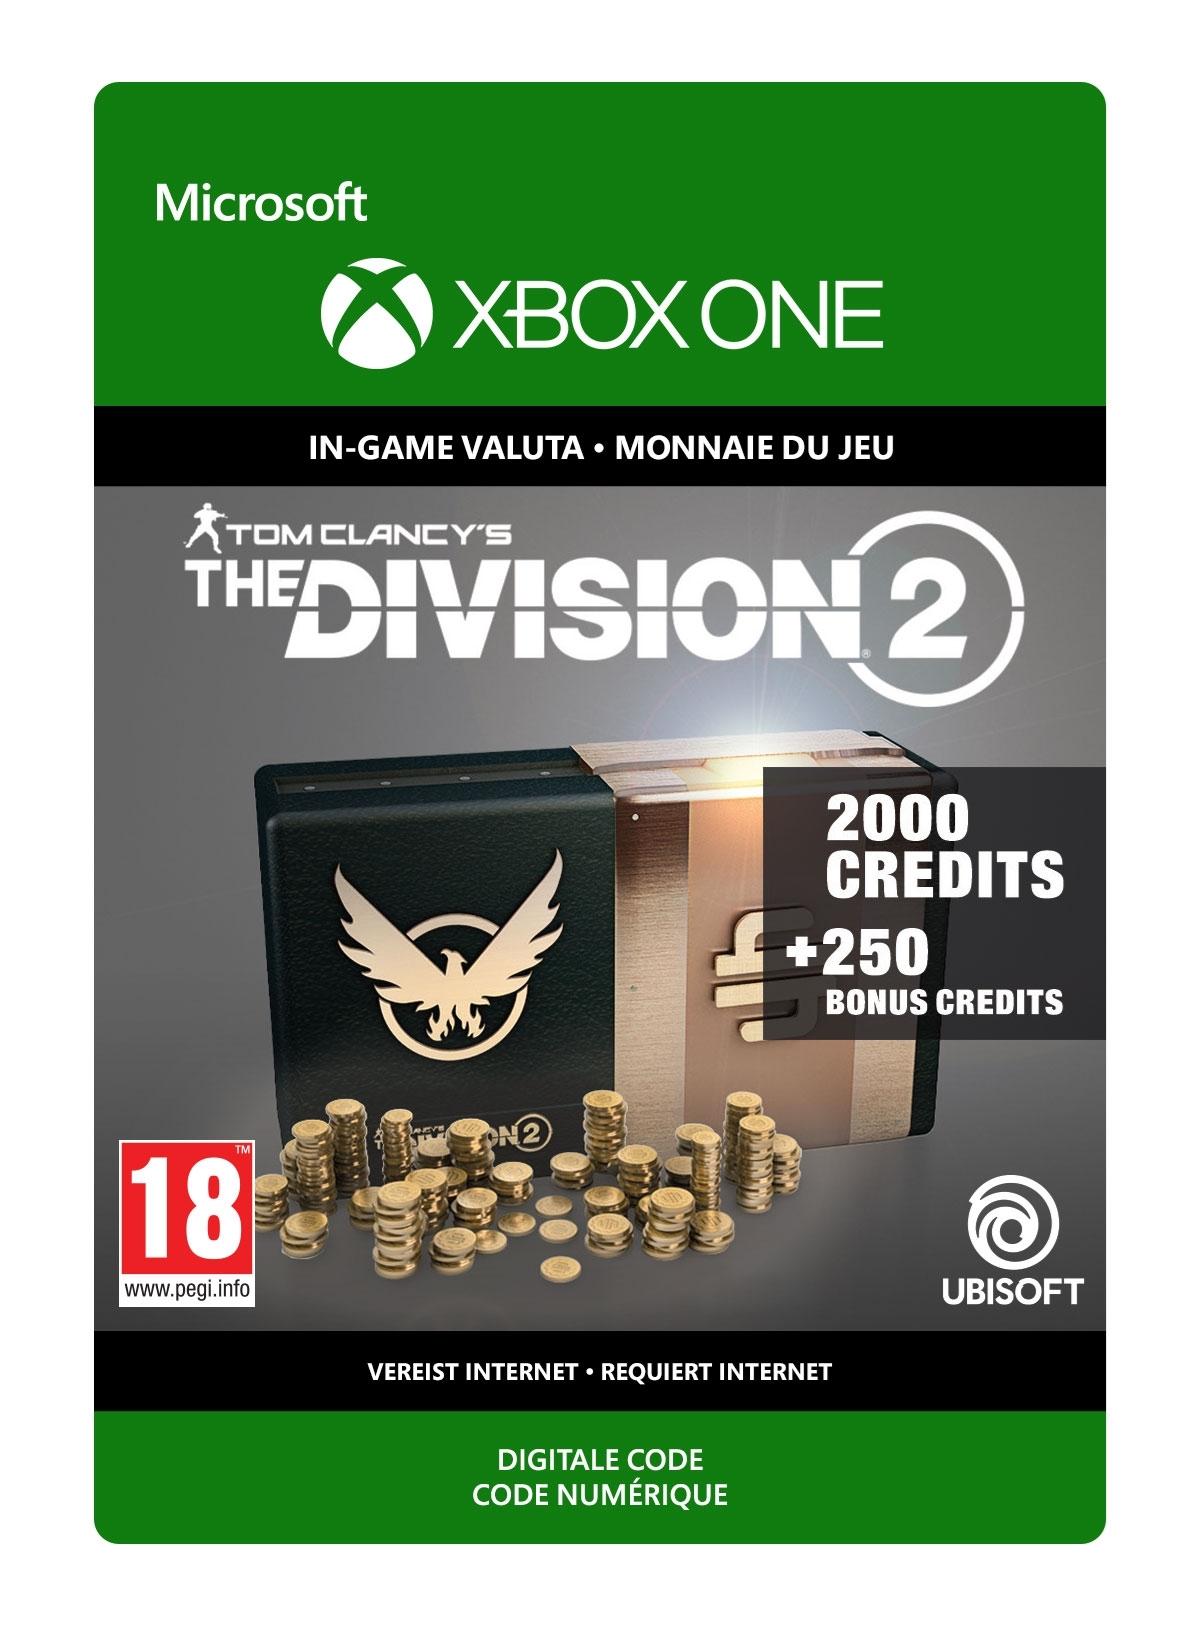 Tom Clancy's The Division 2: 2250 Premium Credits Pack - Xbox One - Add-on | 7D4-00351 (8aea22f4-1384-194e-9731-f02df69cb032)